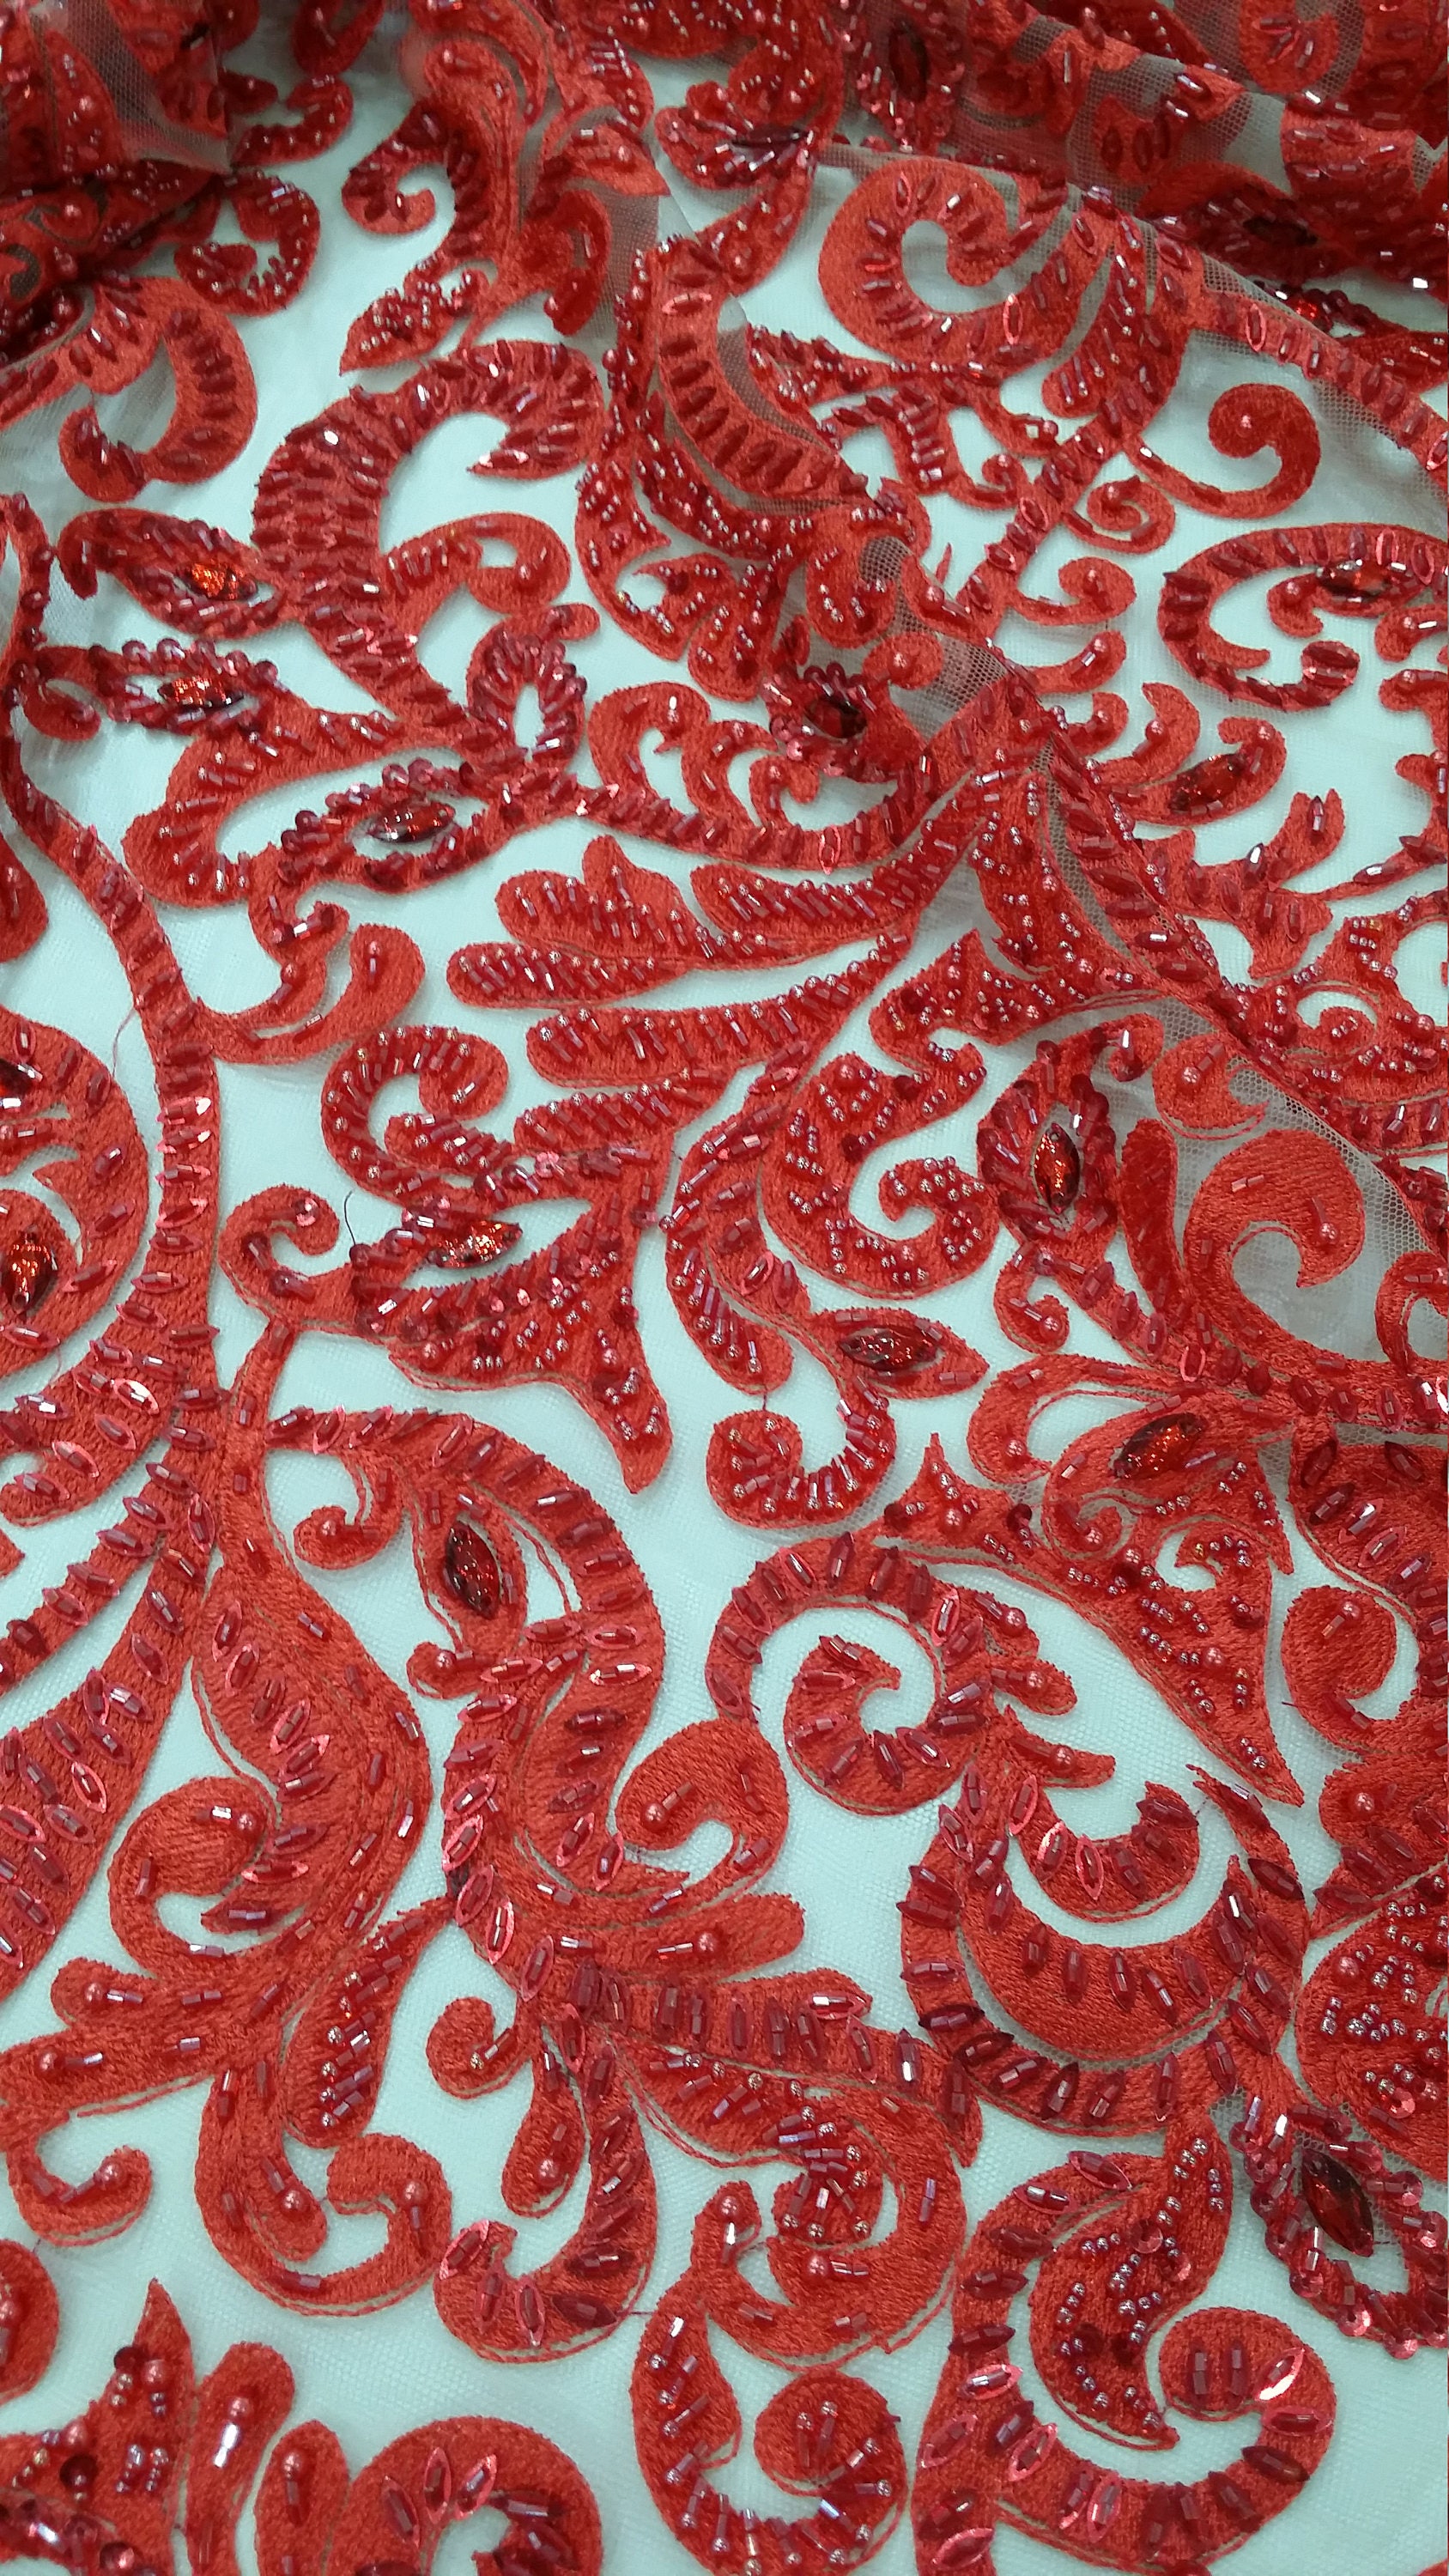 Red Lace fabric by the yard, French Lace, Alencon Lace, Bridal lace ...